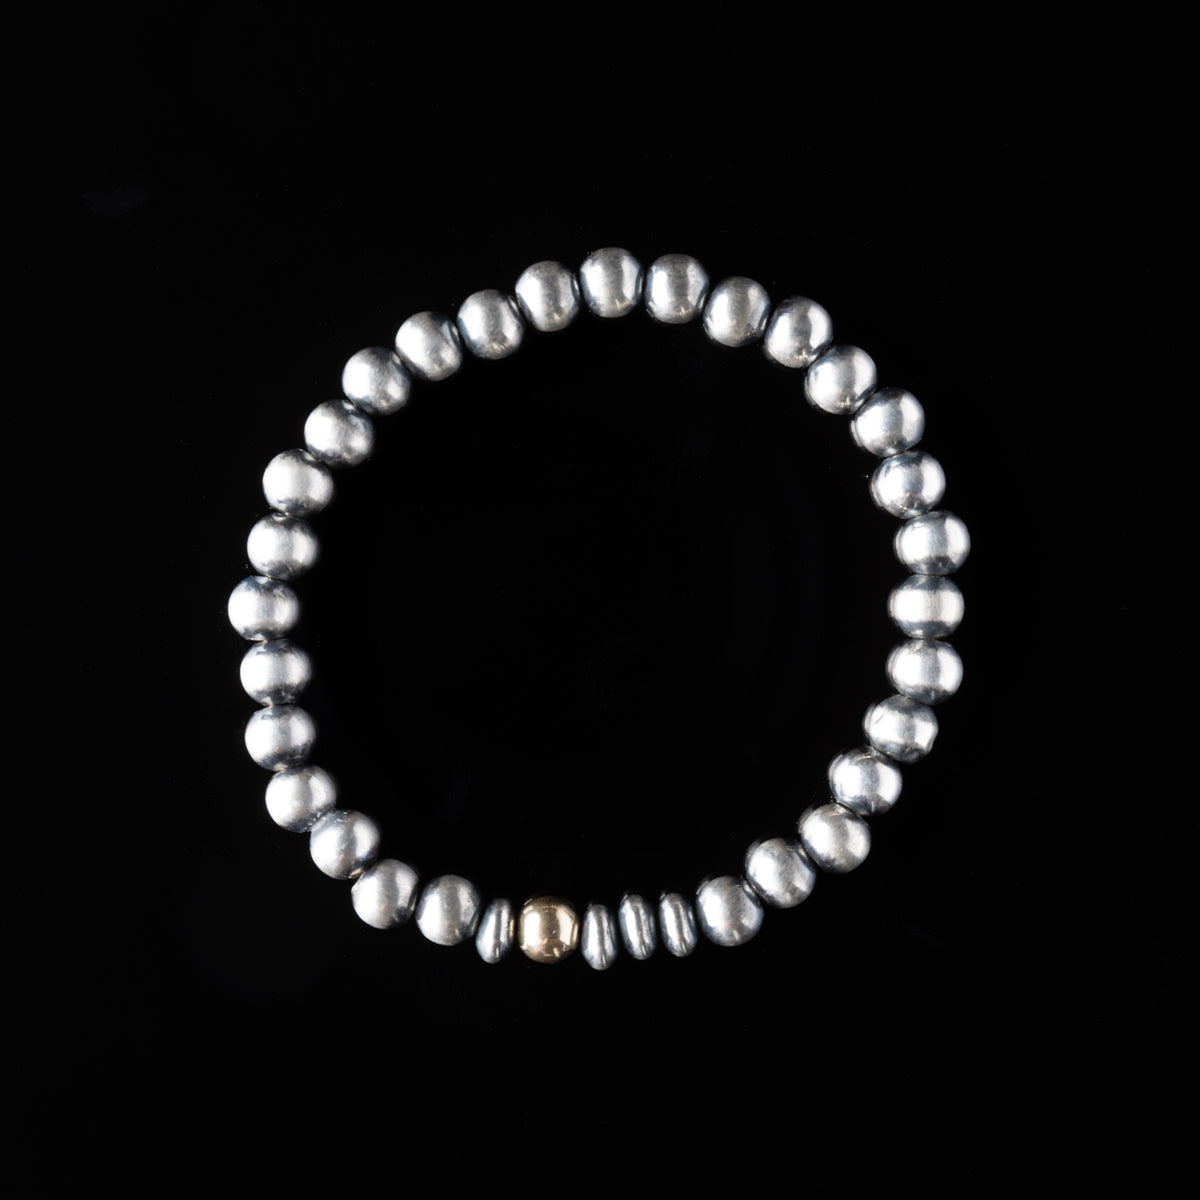 5mm Santa Fe Pearl Stretch Bracelet with 14k Gold Accent Bead